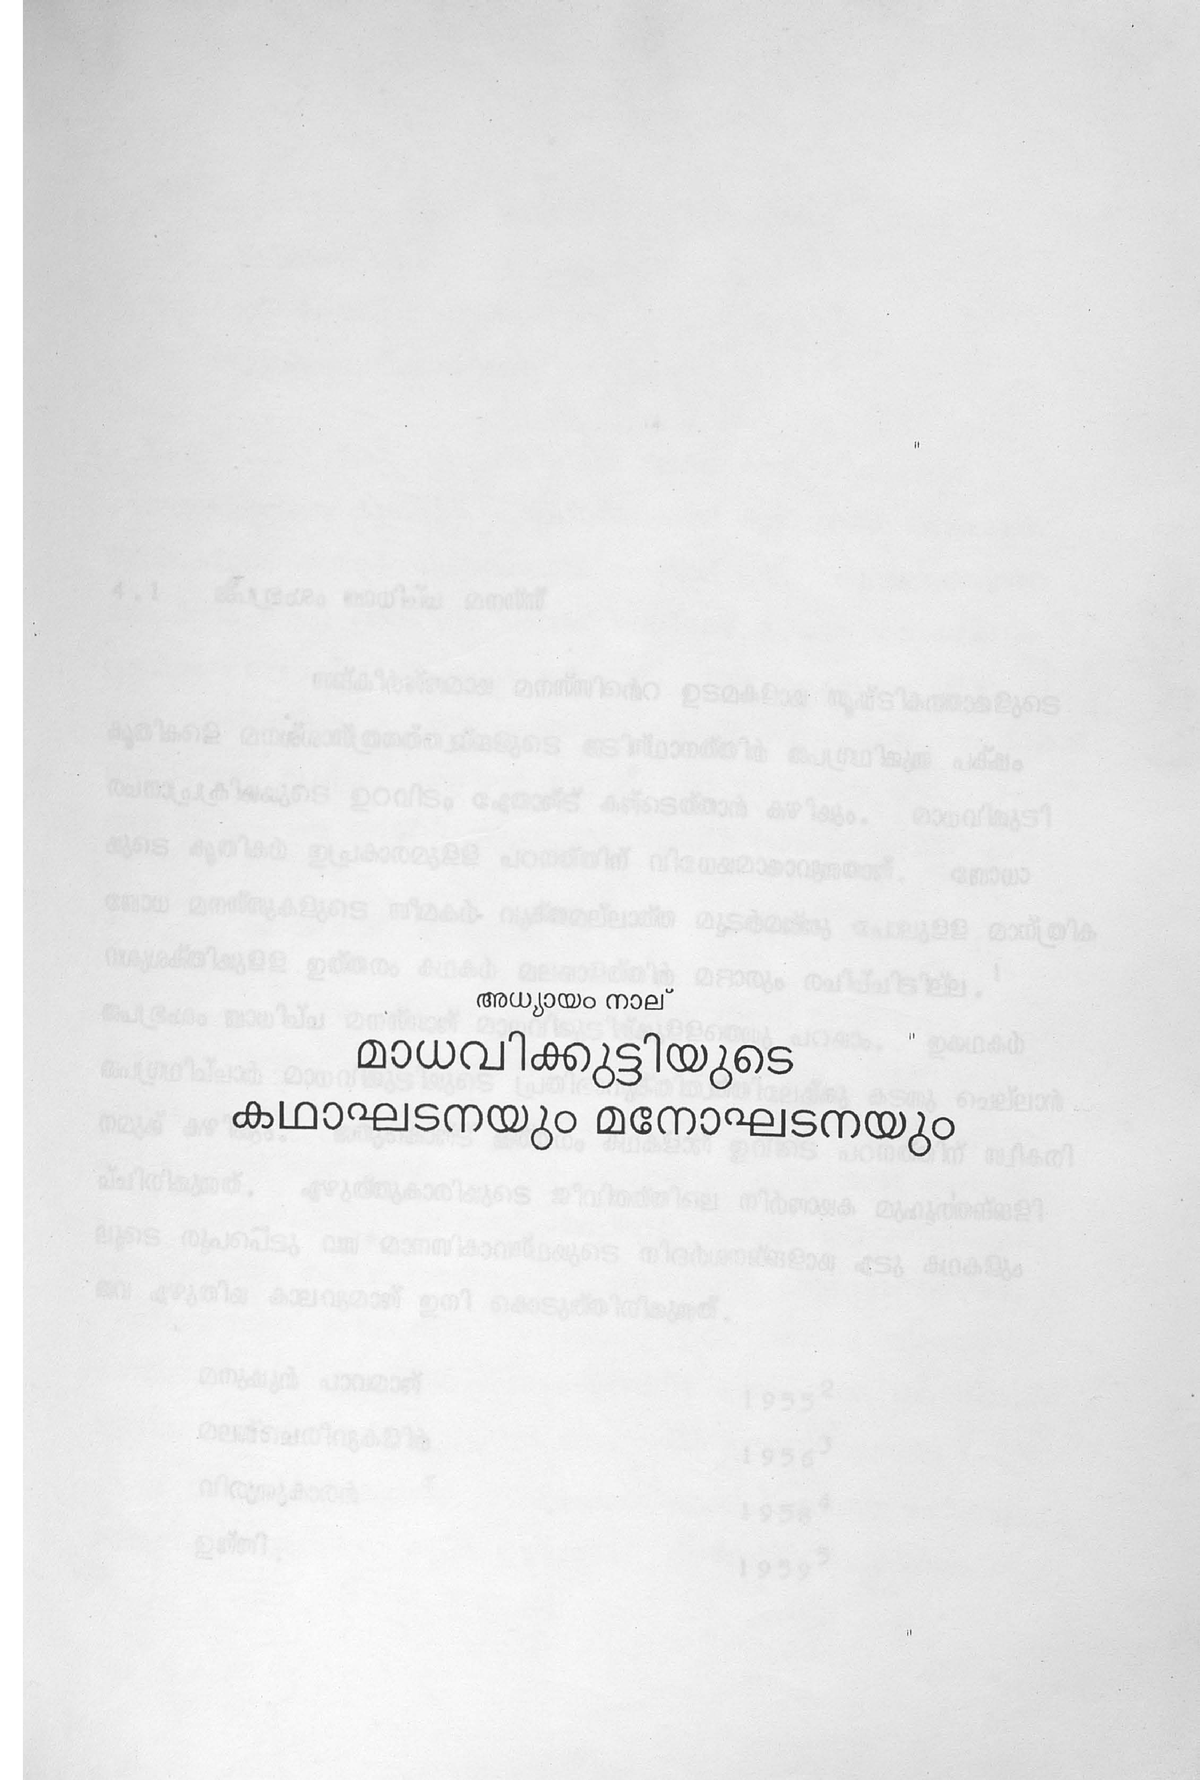 assignment is malayalam meaning